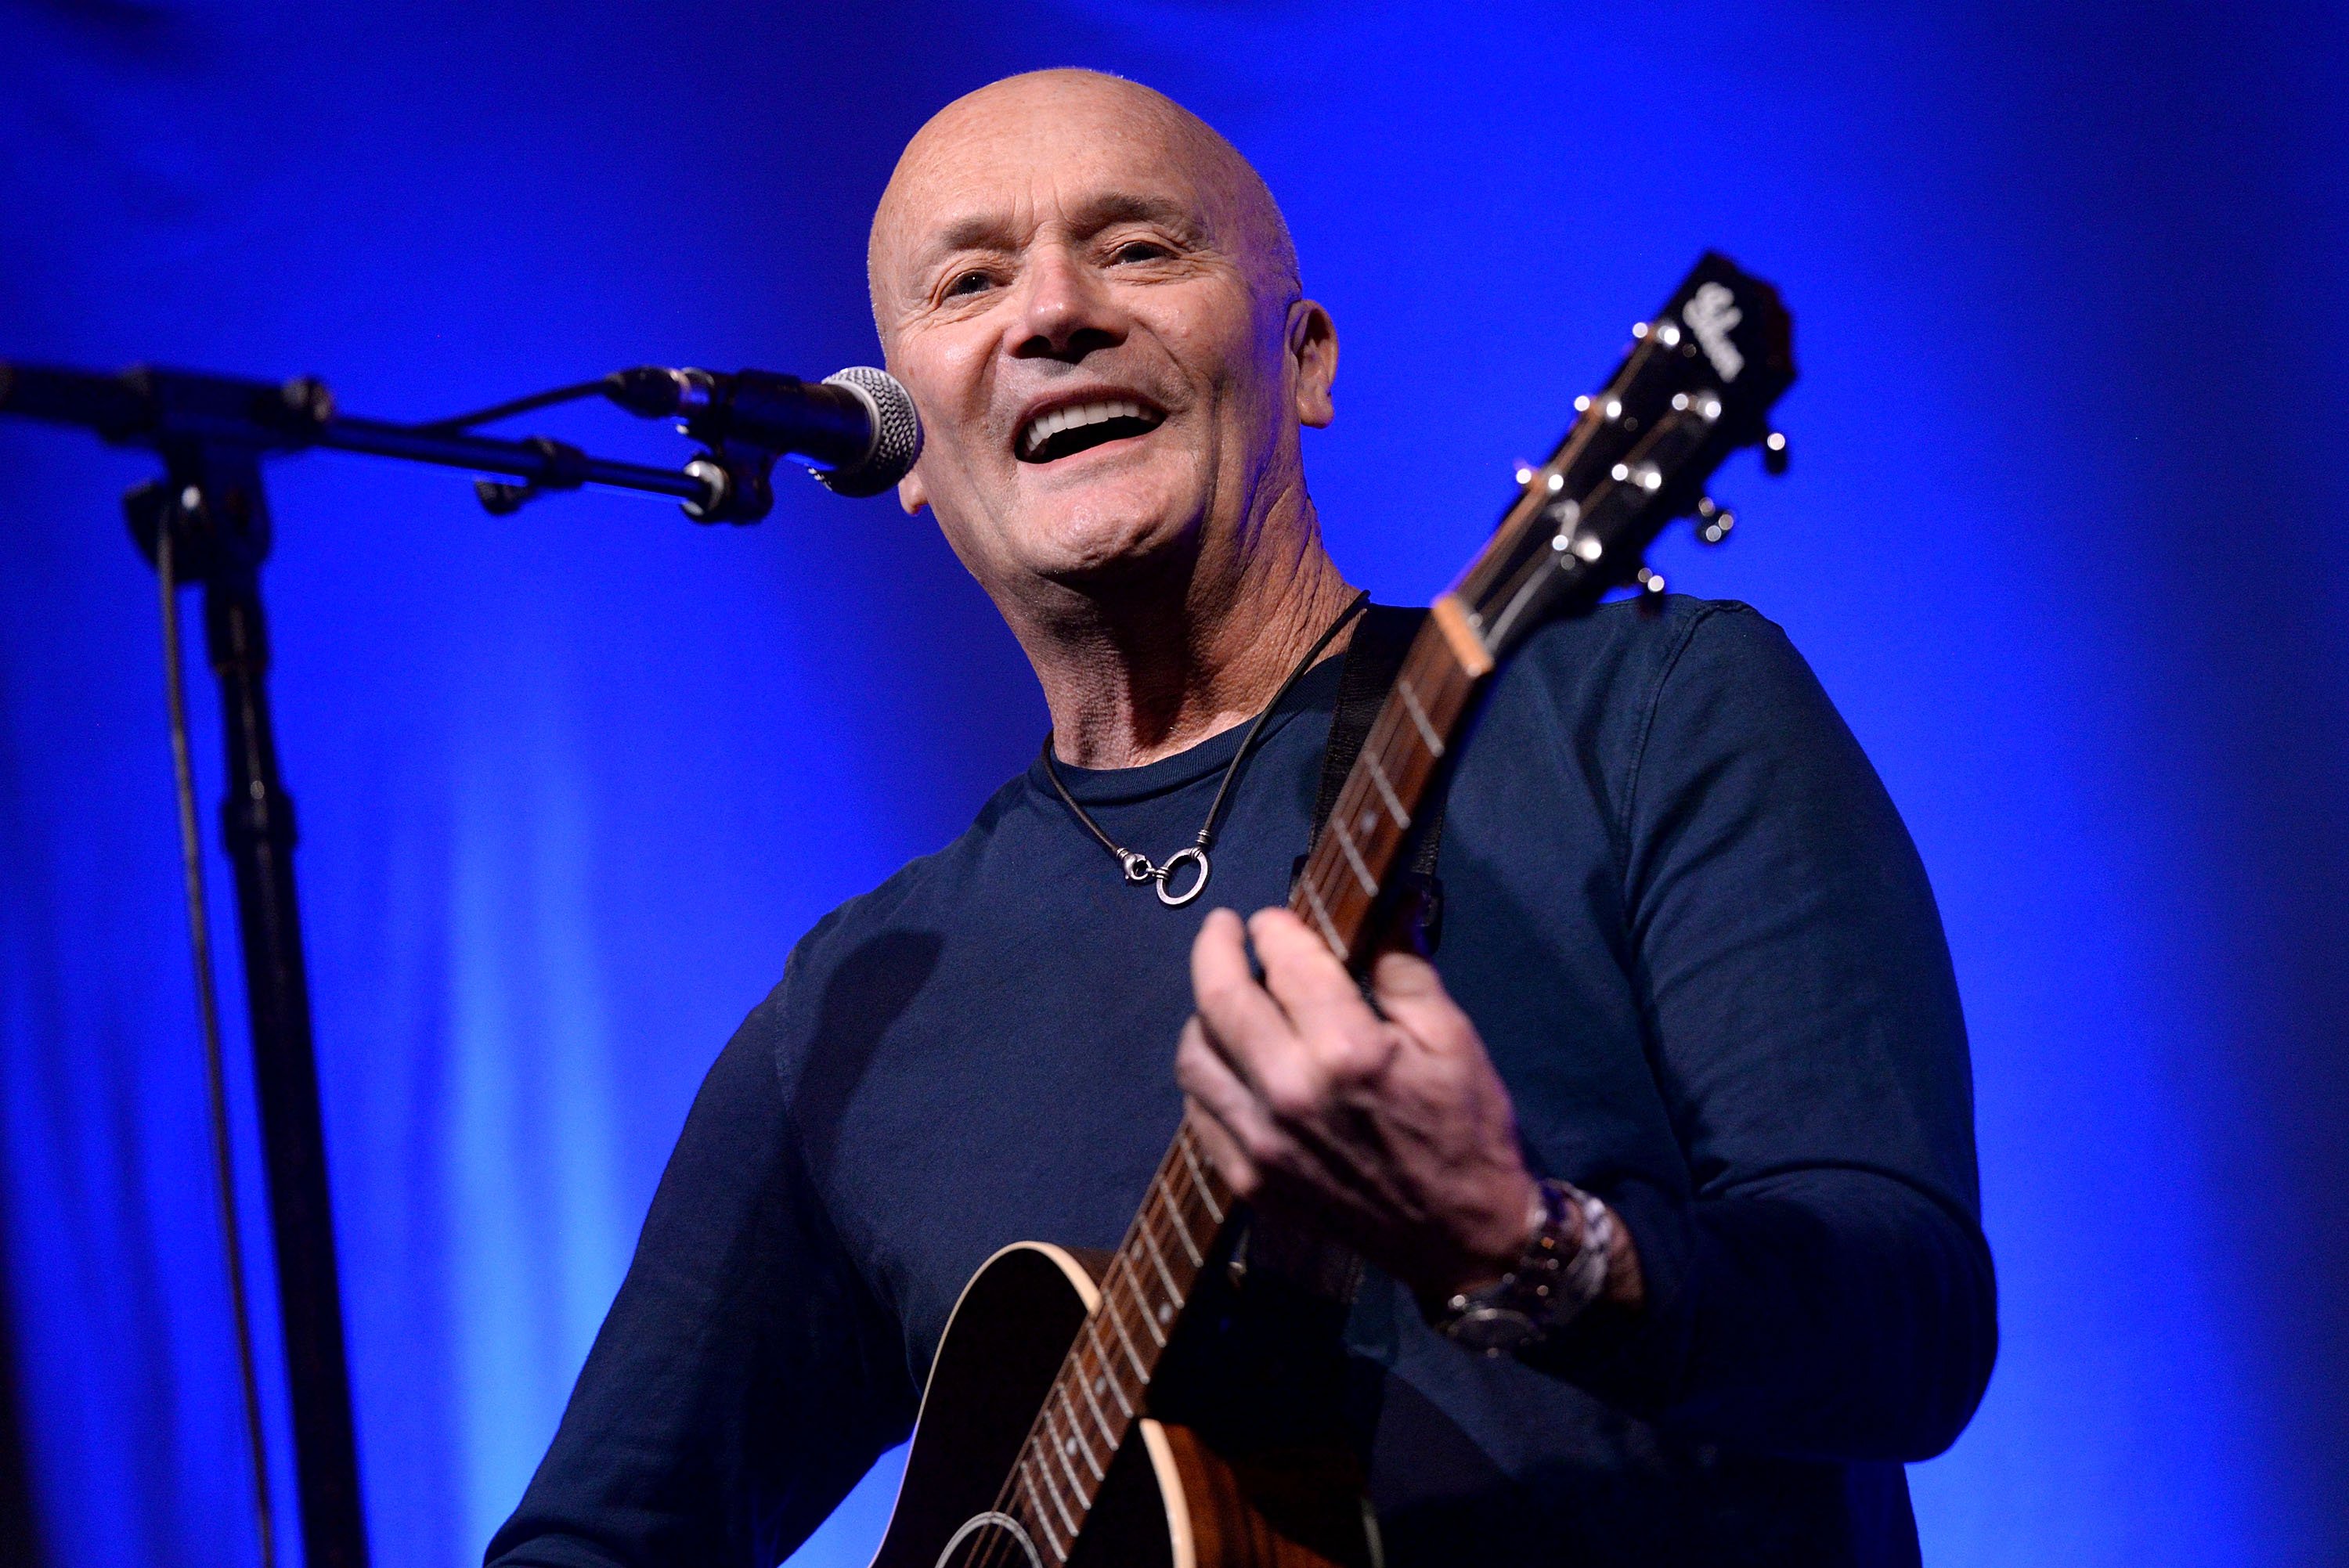 The Office Fans Might Not Recognize Creed Bratton In This Photo From His Rock Band Days